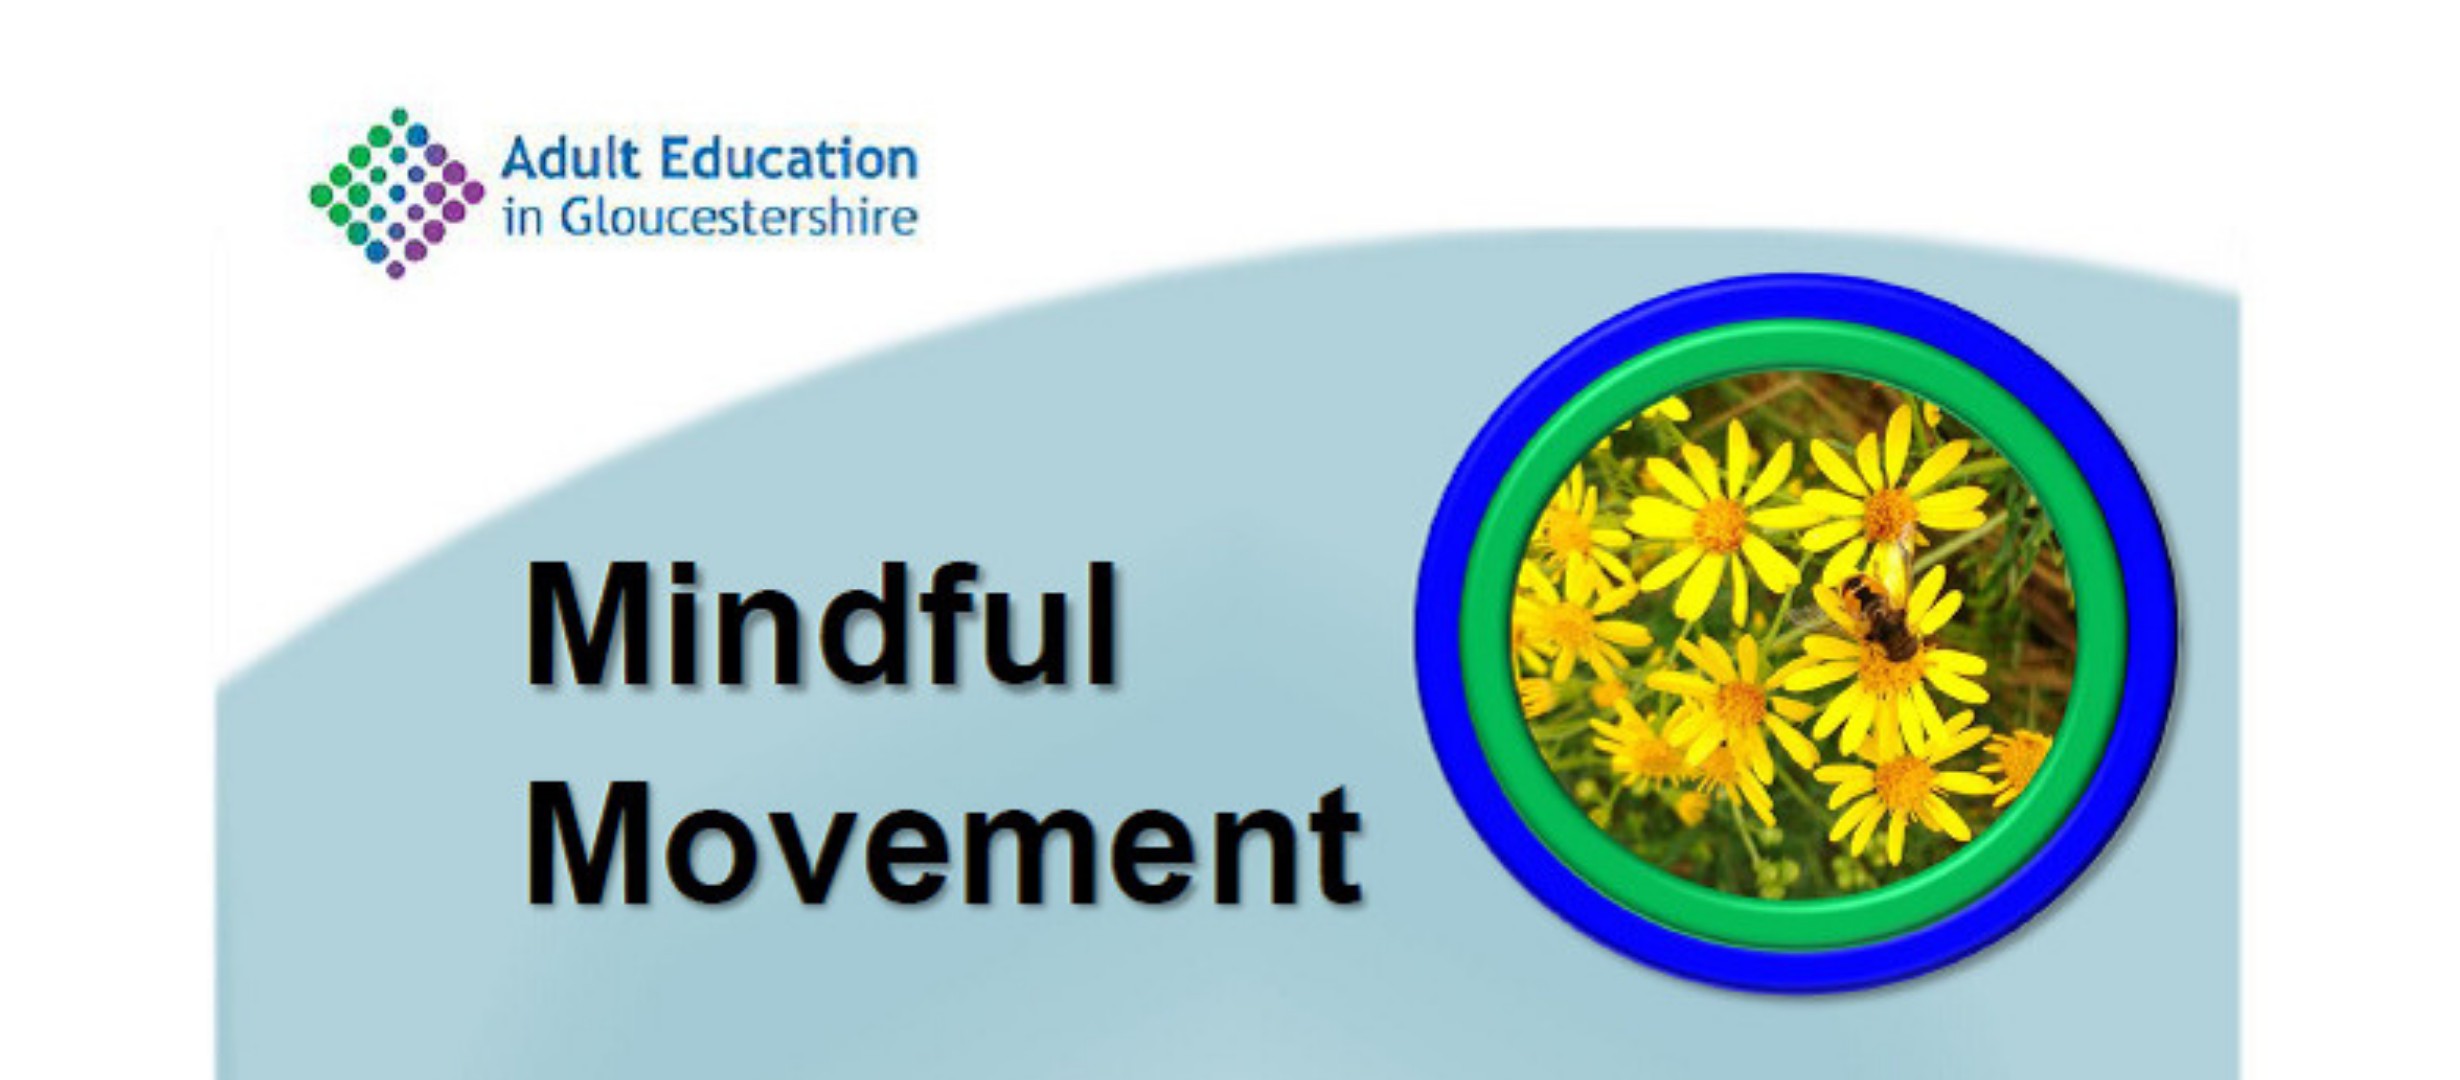 Adult education logo, text 'Mindful movement', image of yellow flowers